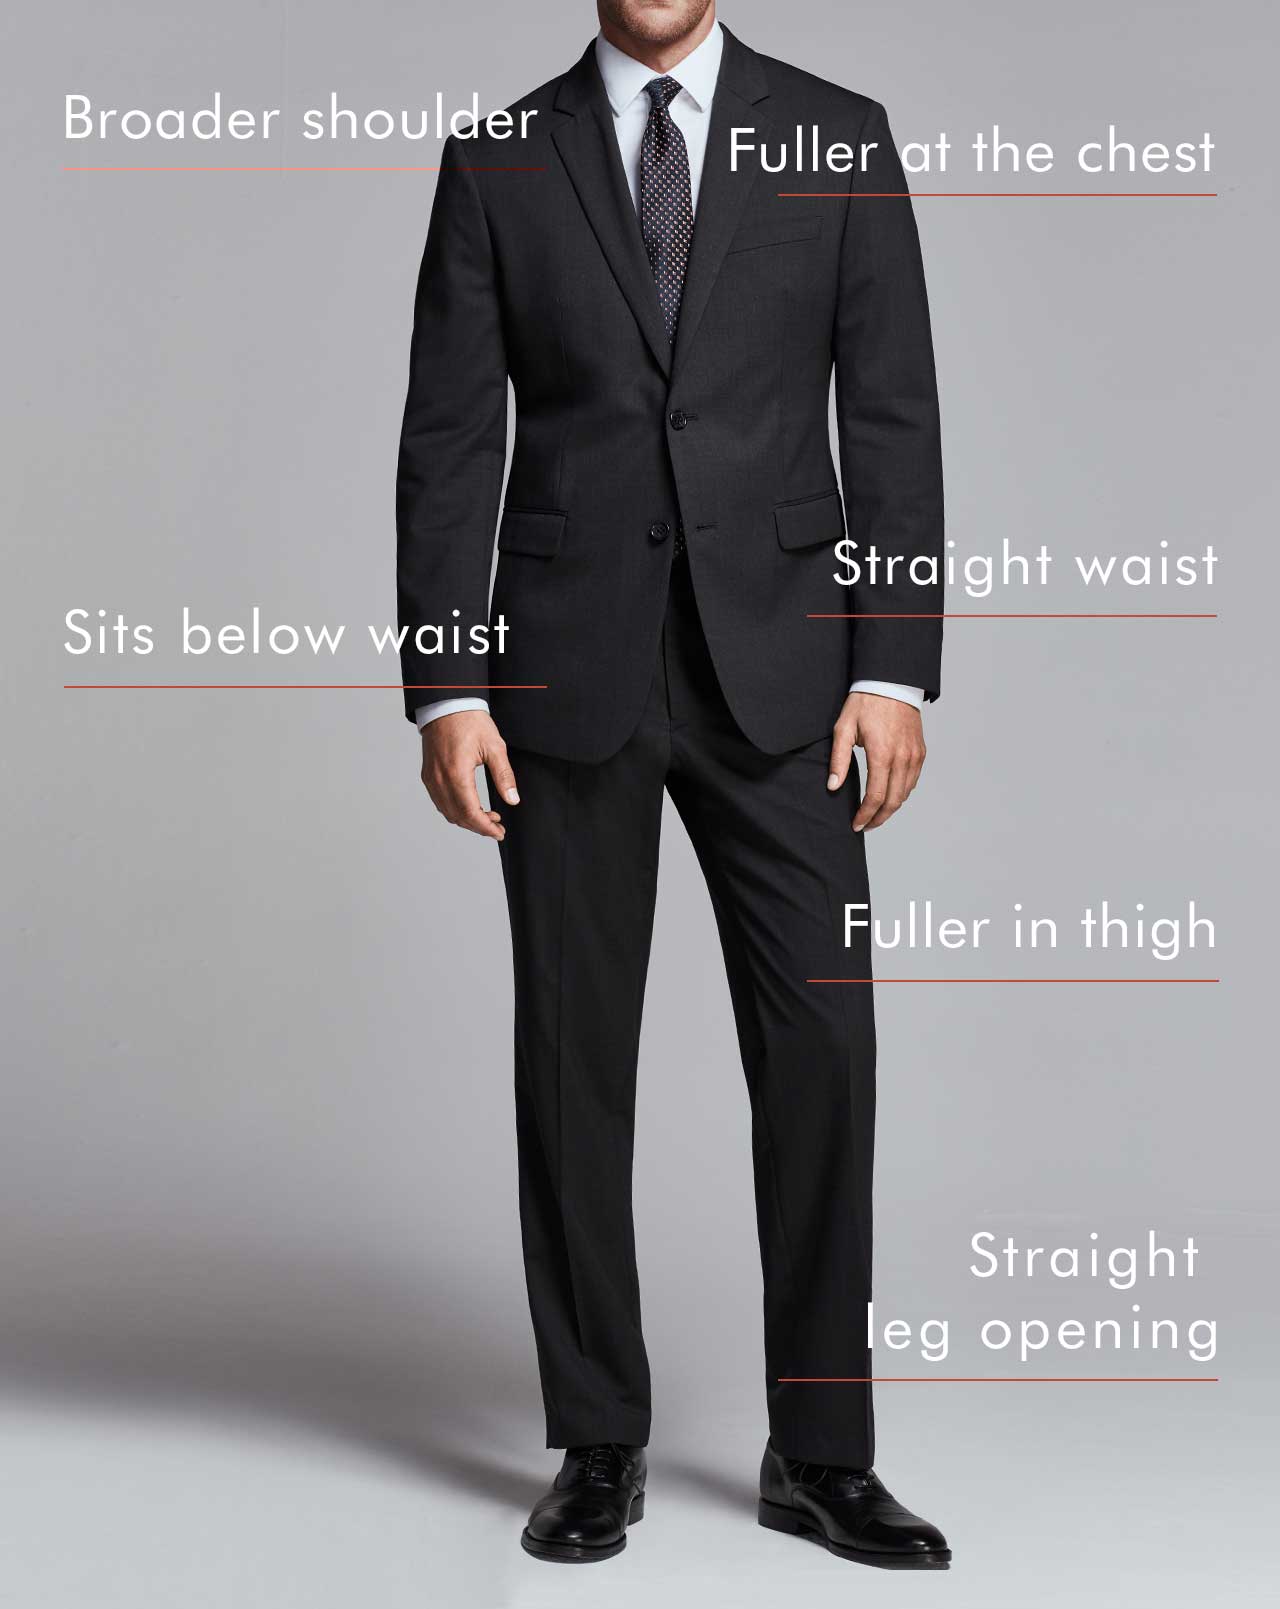 Mens Suits Fitting Guide : Suit fit guide | Suit fit guide, Snappy ...